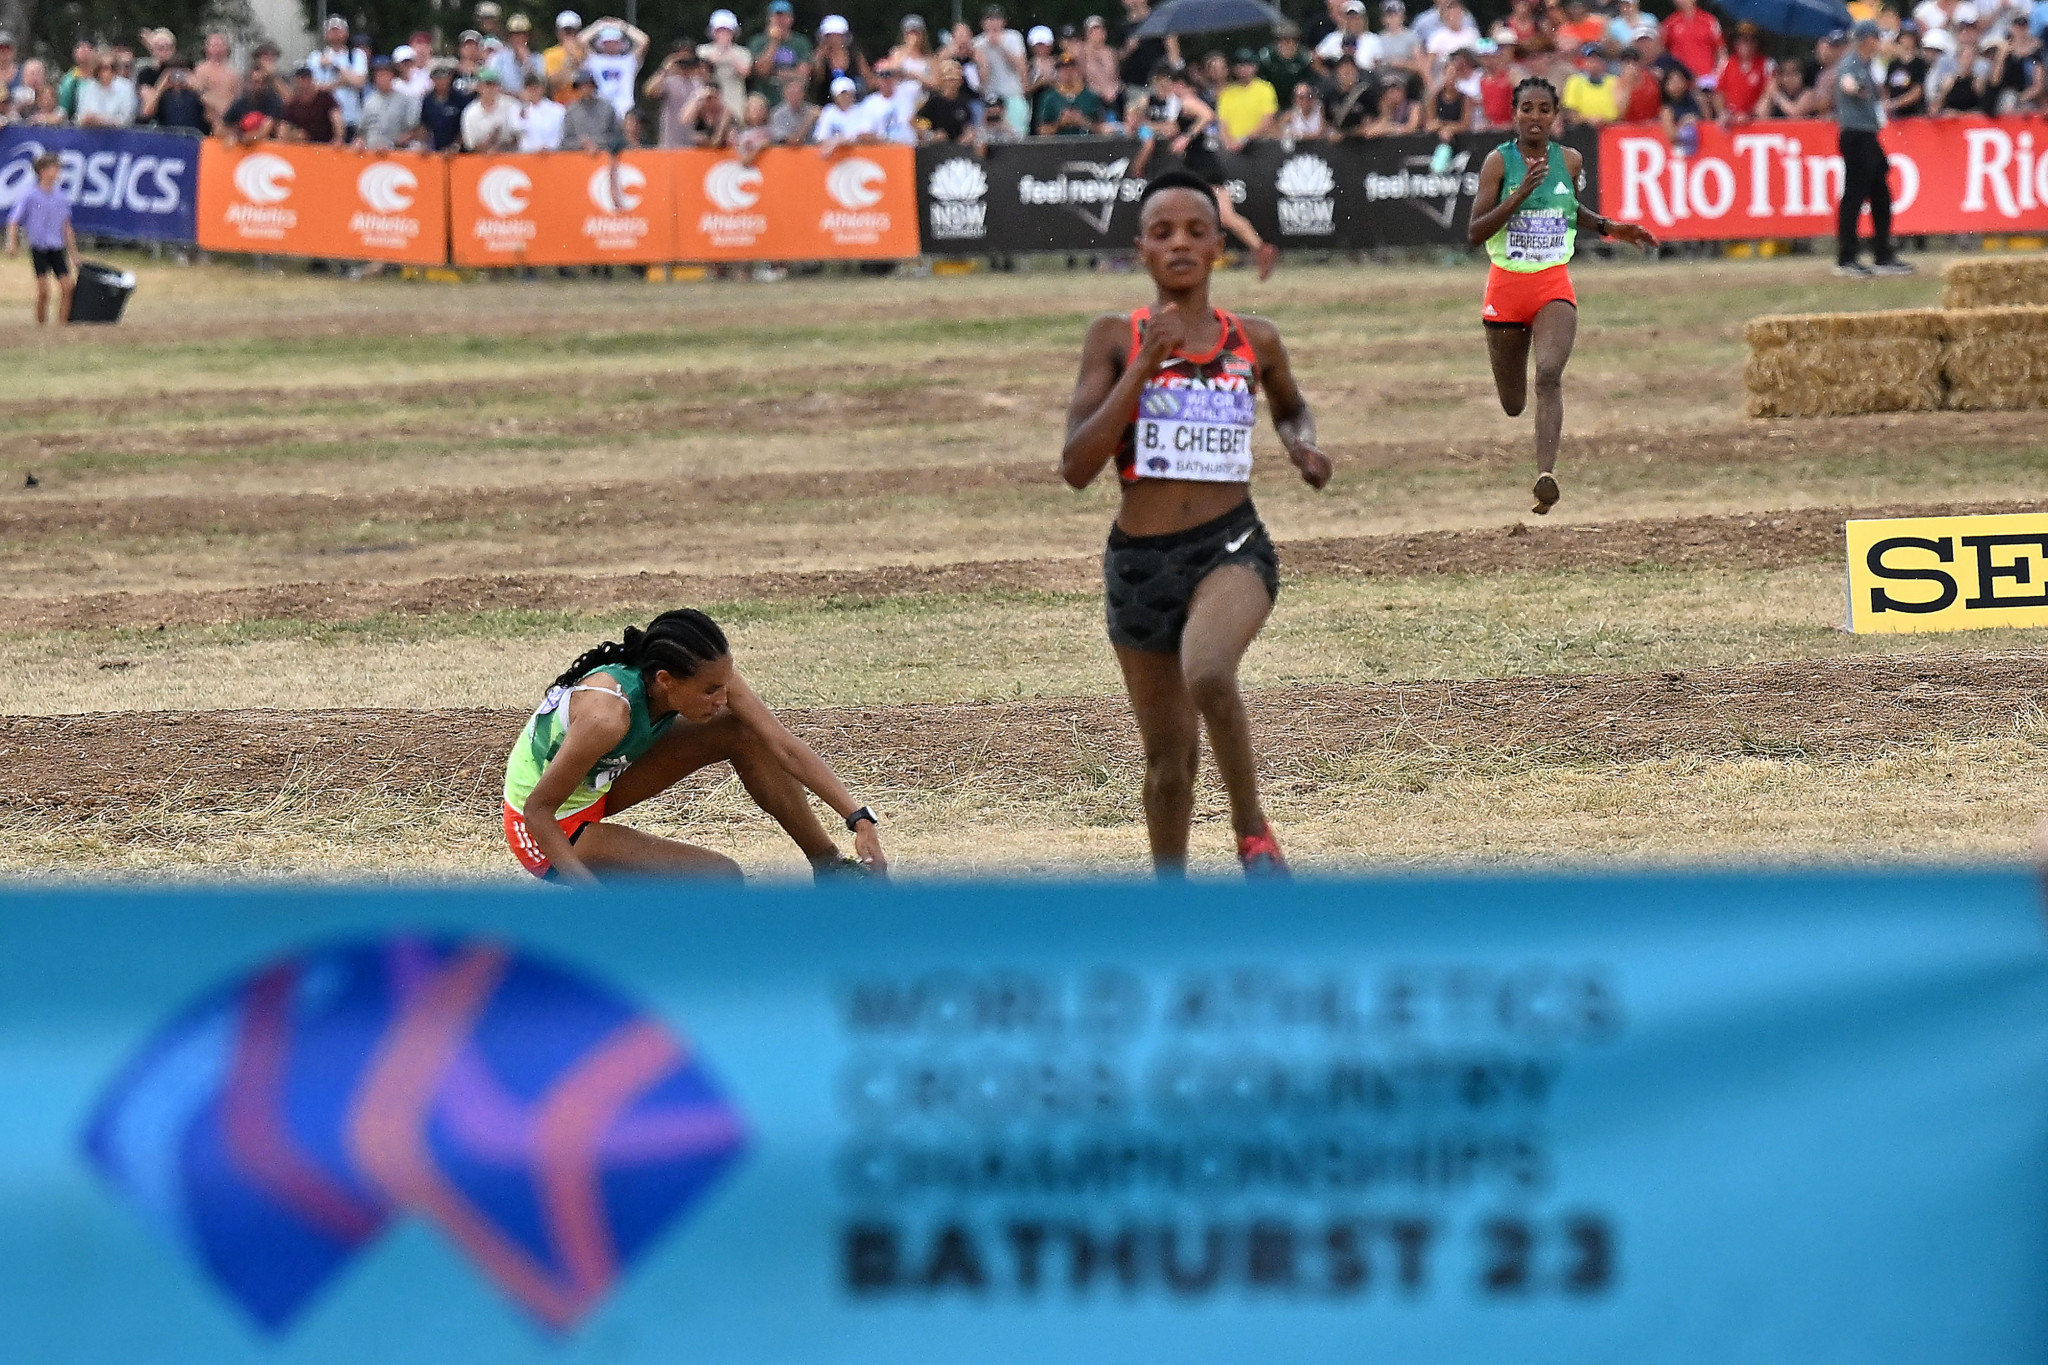 Gidey collapses within sight of gold and Kiplimo triumphs in gruelling World Cross Country Championships